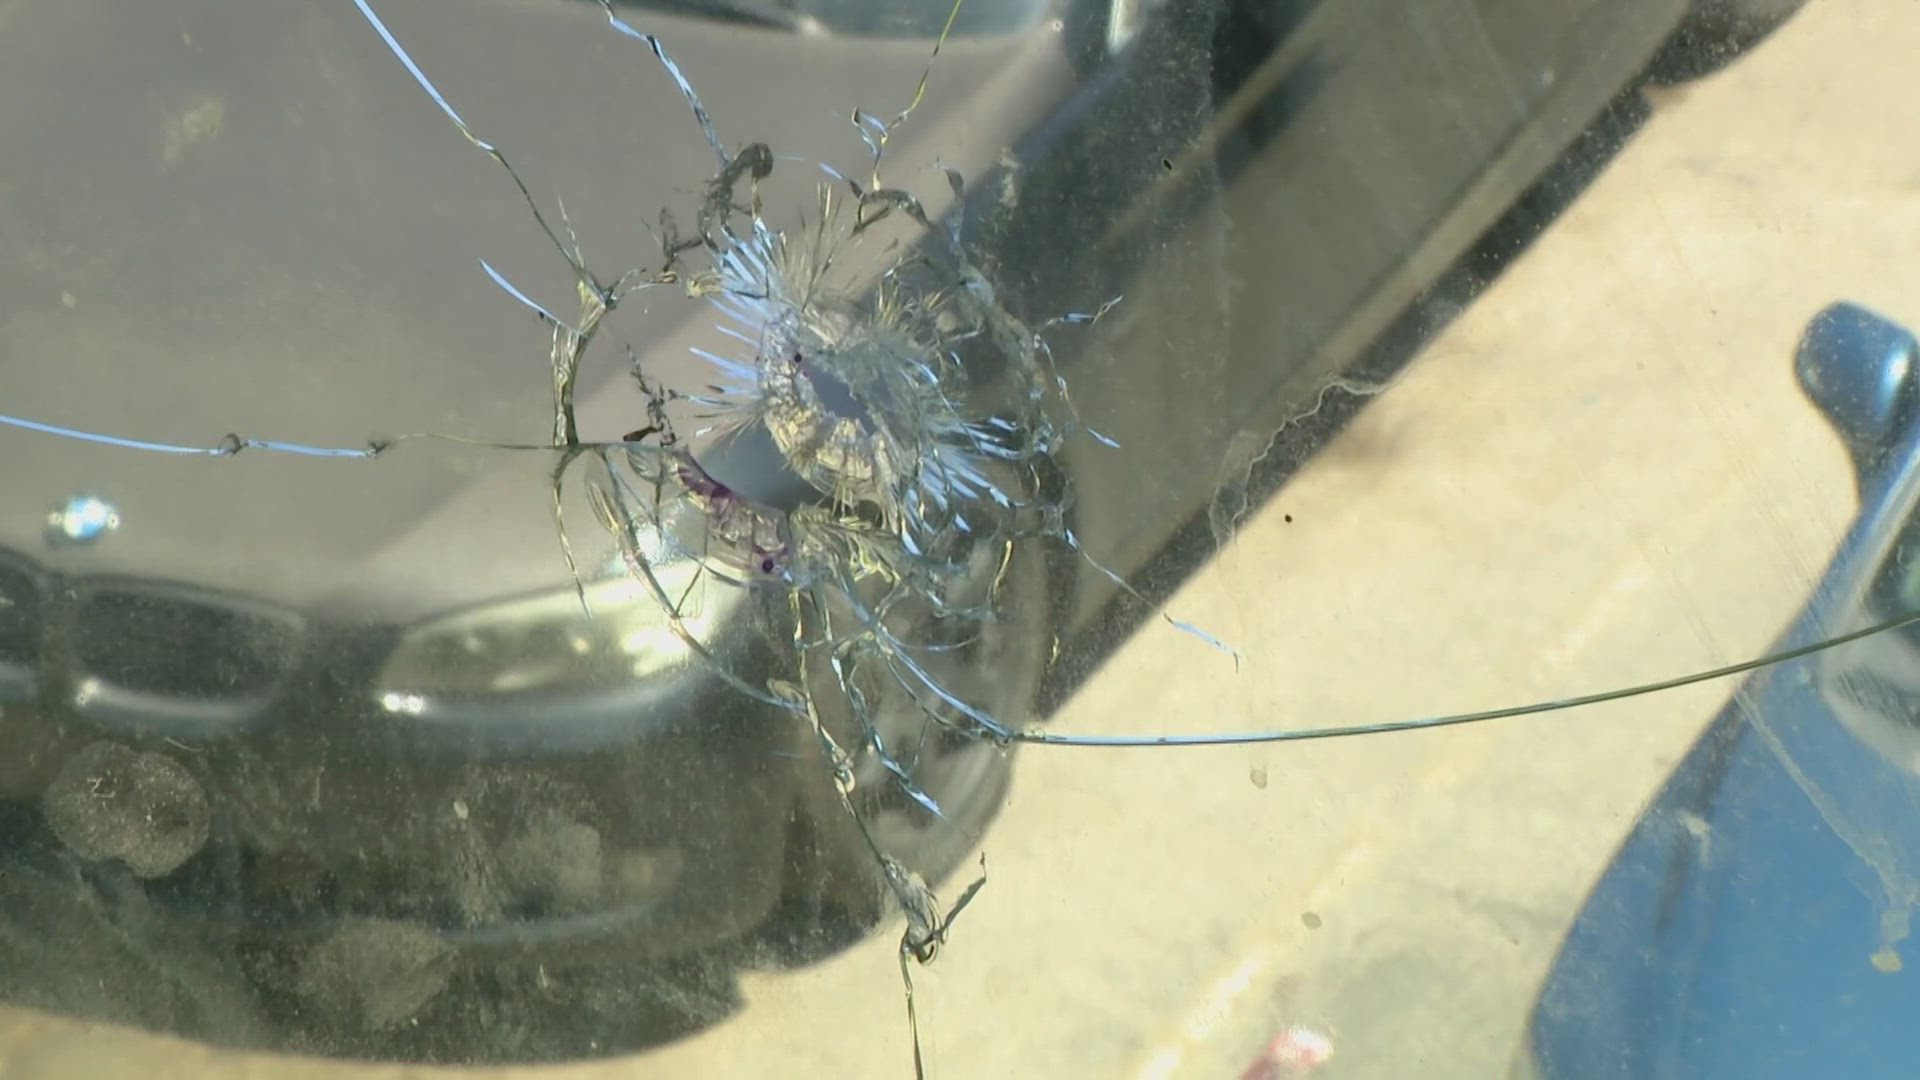 Indy Town residents say their apartment is not fixing damages sustained after a shooting over the weekend.